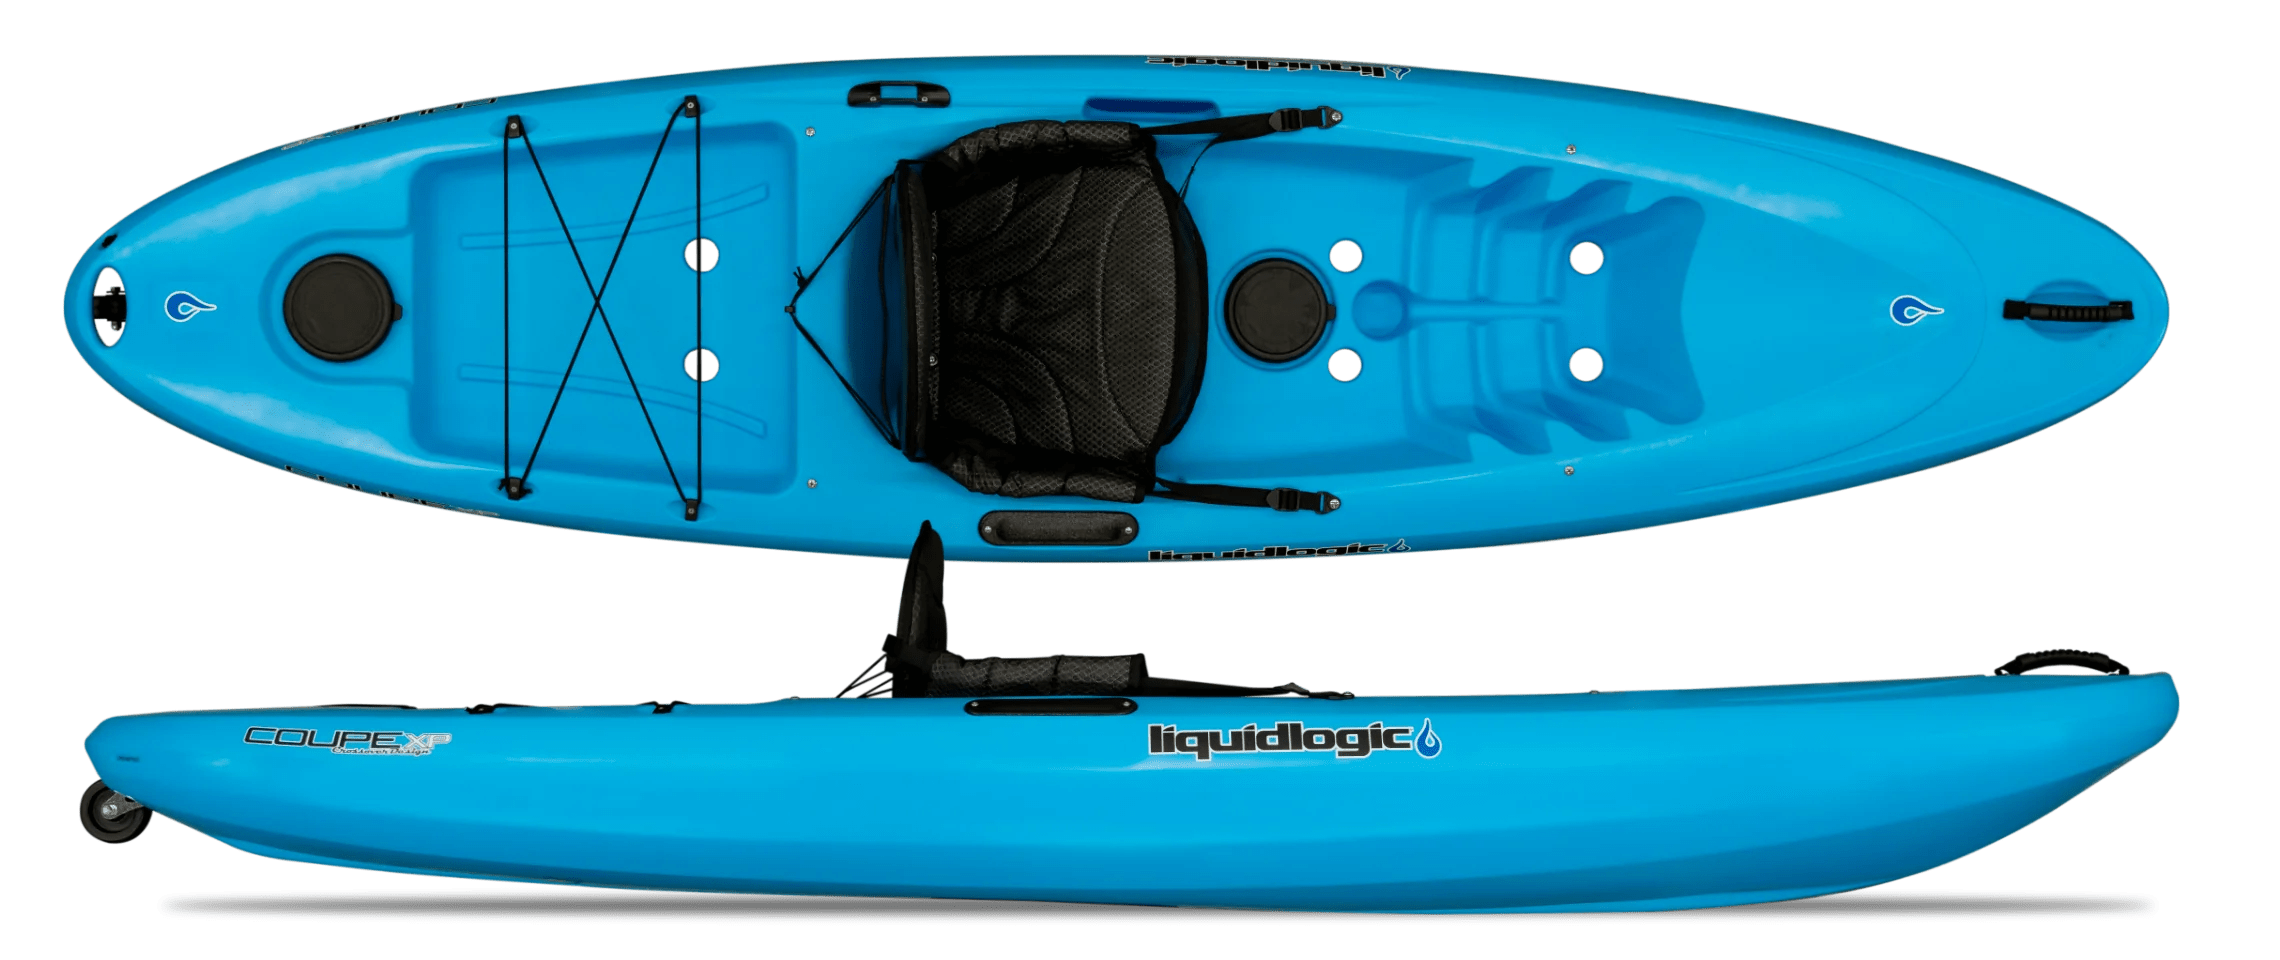 Liquidlogic Coupe XP Crossover Sit On Top Kayak